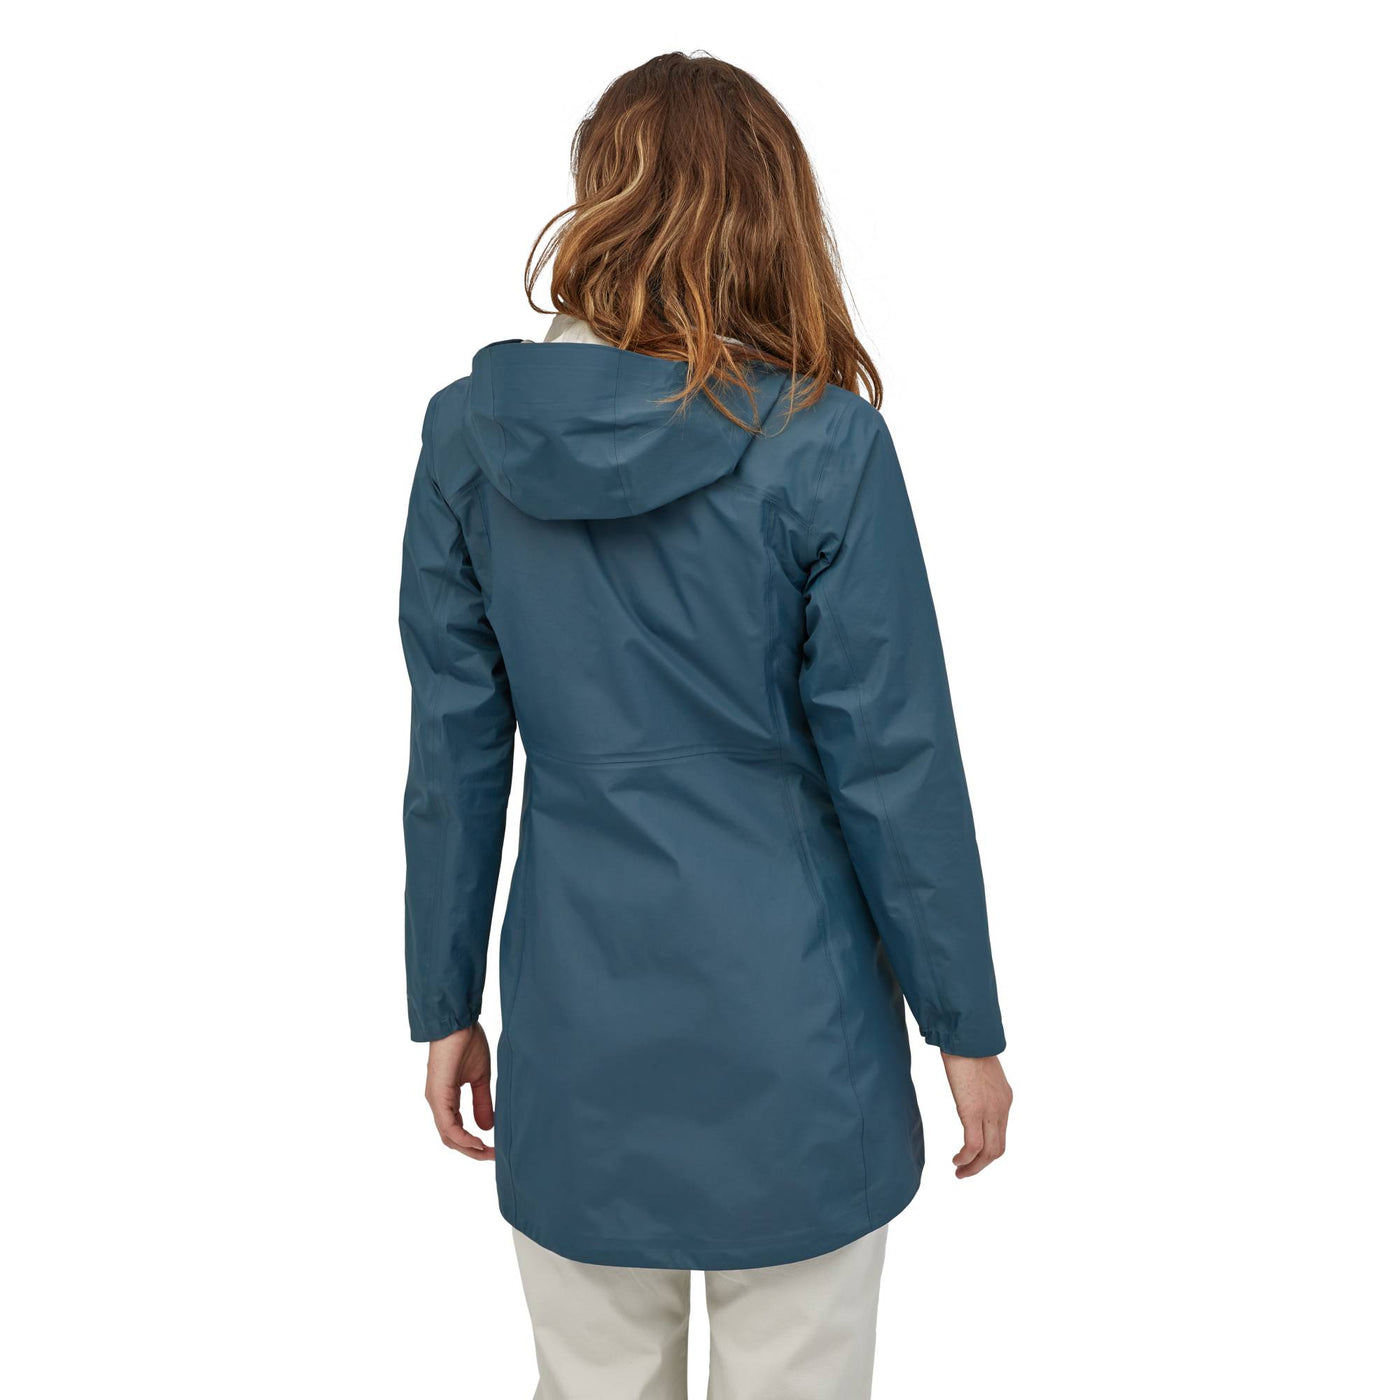 Chaqueta Impermeable Patagonia Mujer / W S Torrentshell 3L City Coat Talla Unica XS